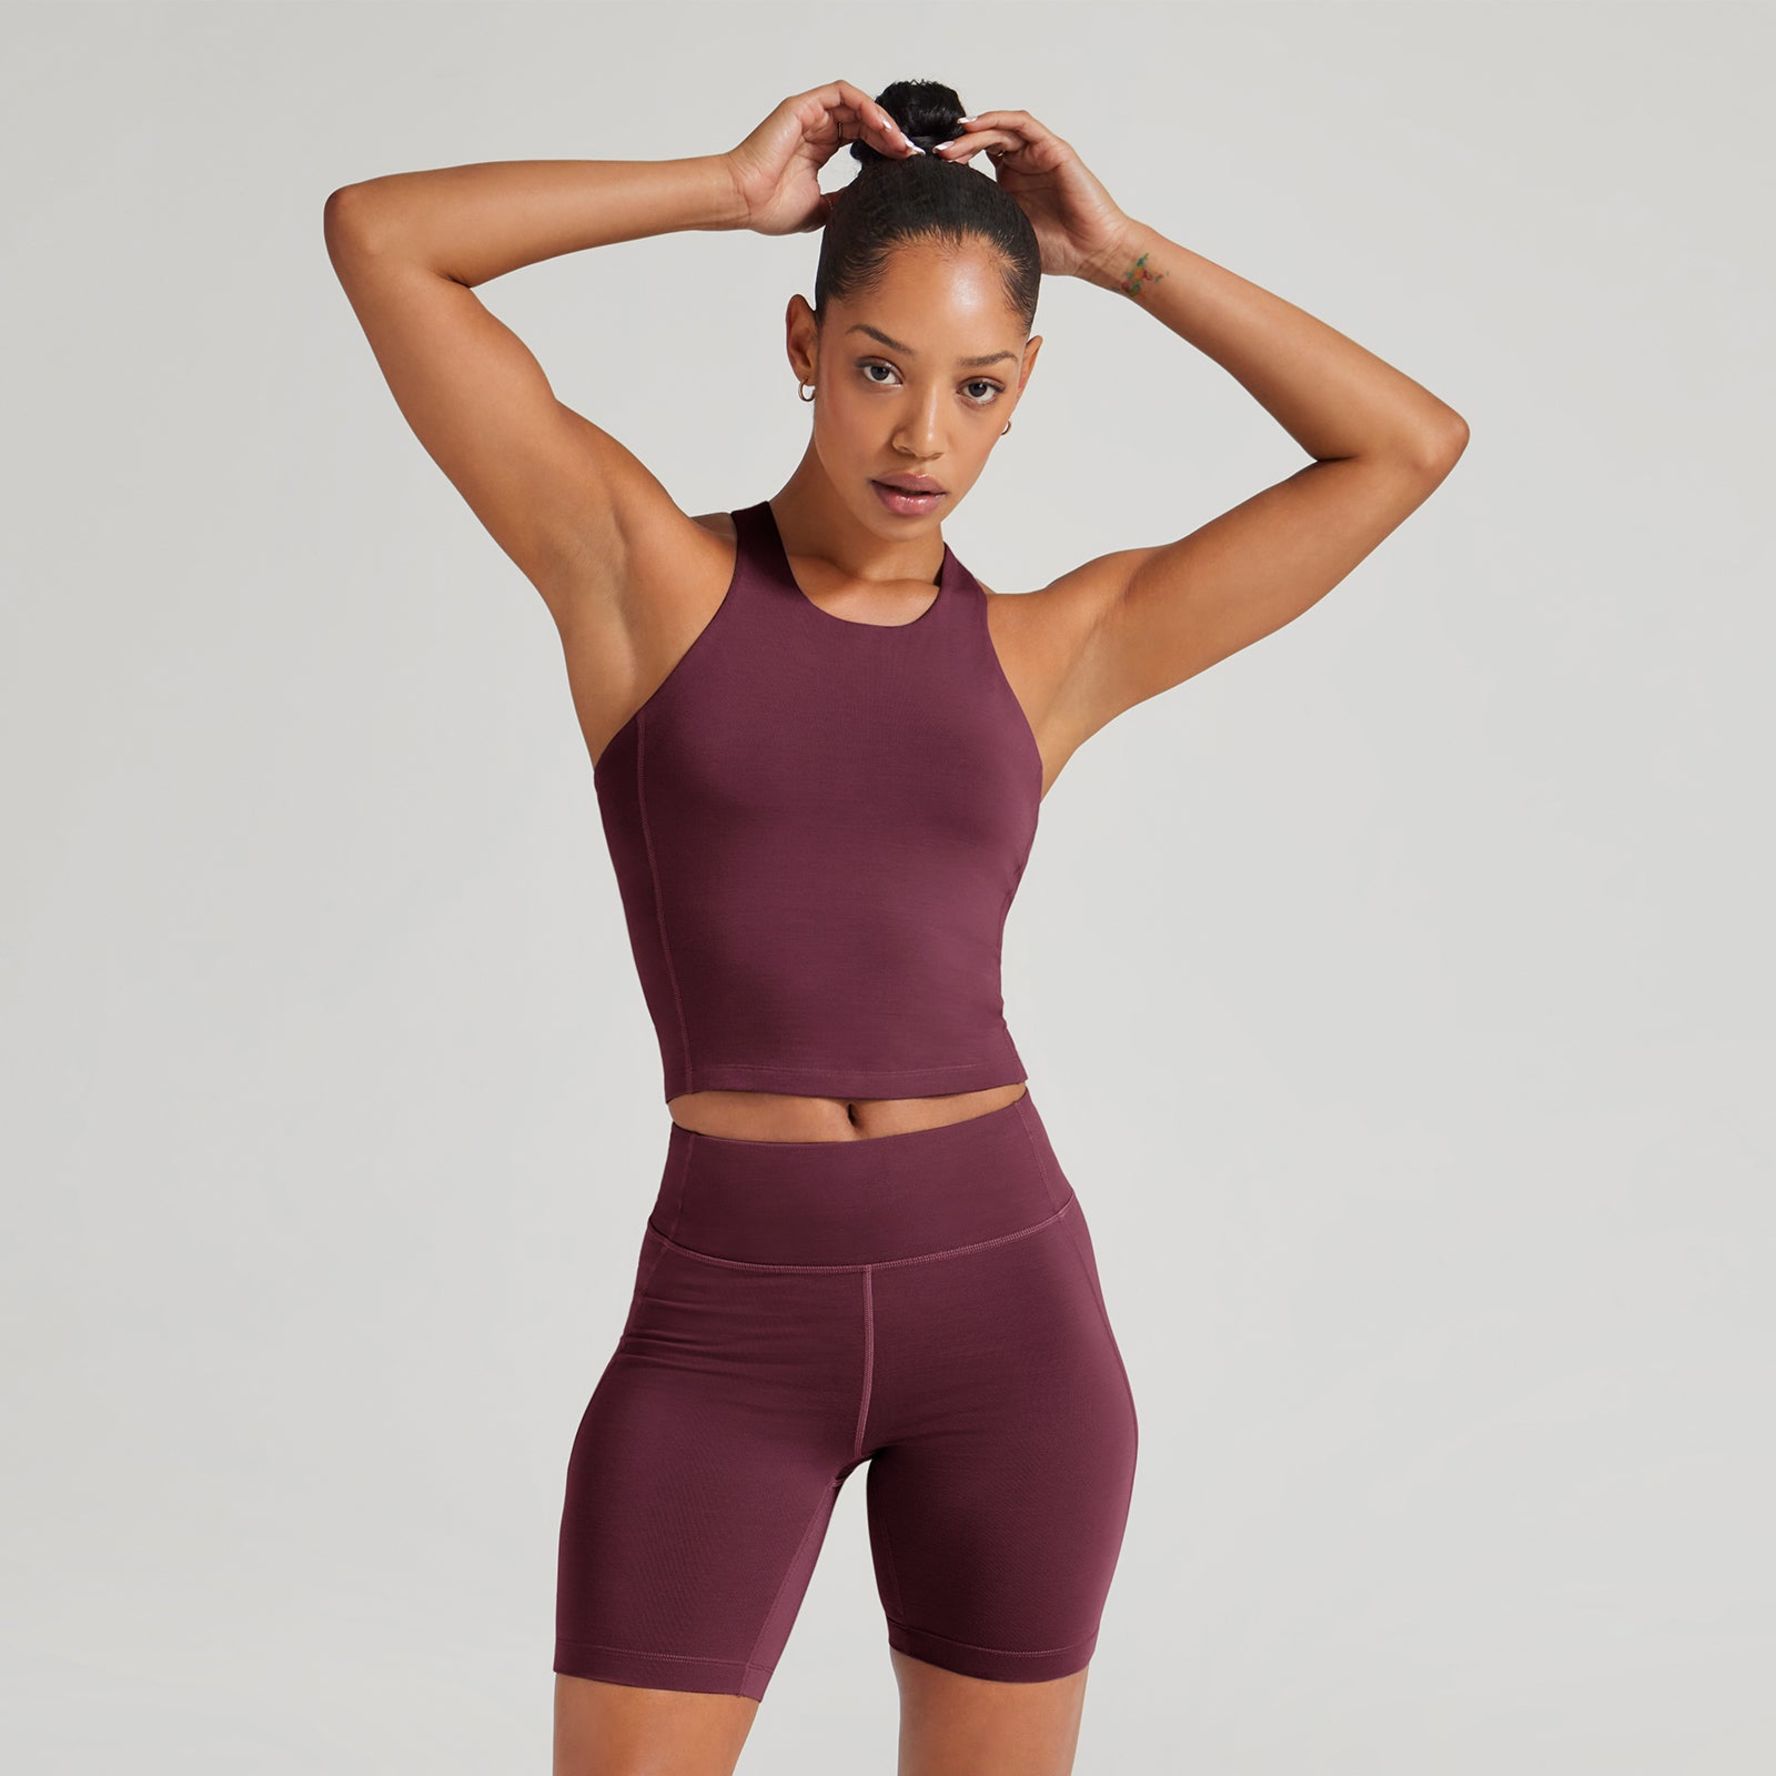 Women's Natural Run Form Tank with Built-In Bra